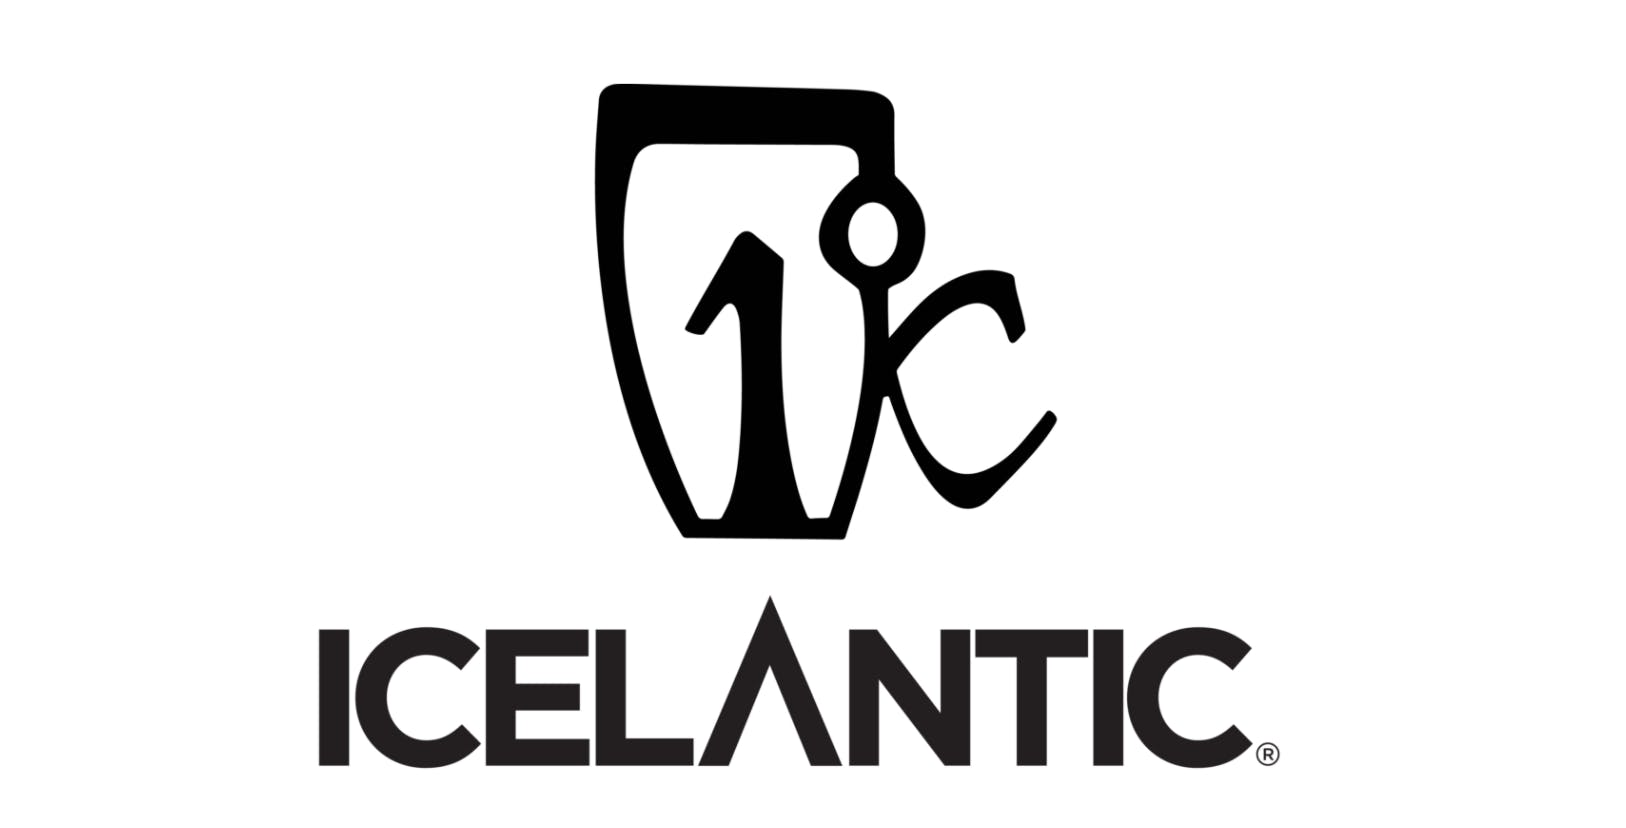 The Icelantic logo reads "Icelantic" under a stylized black drawing. 